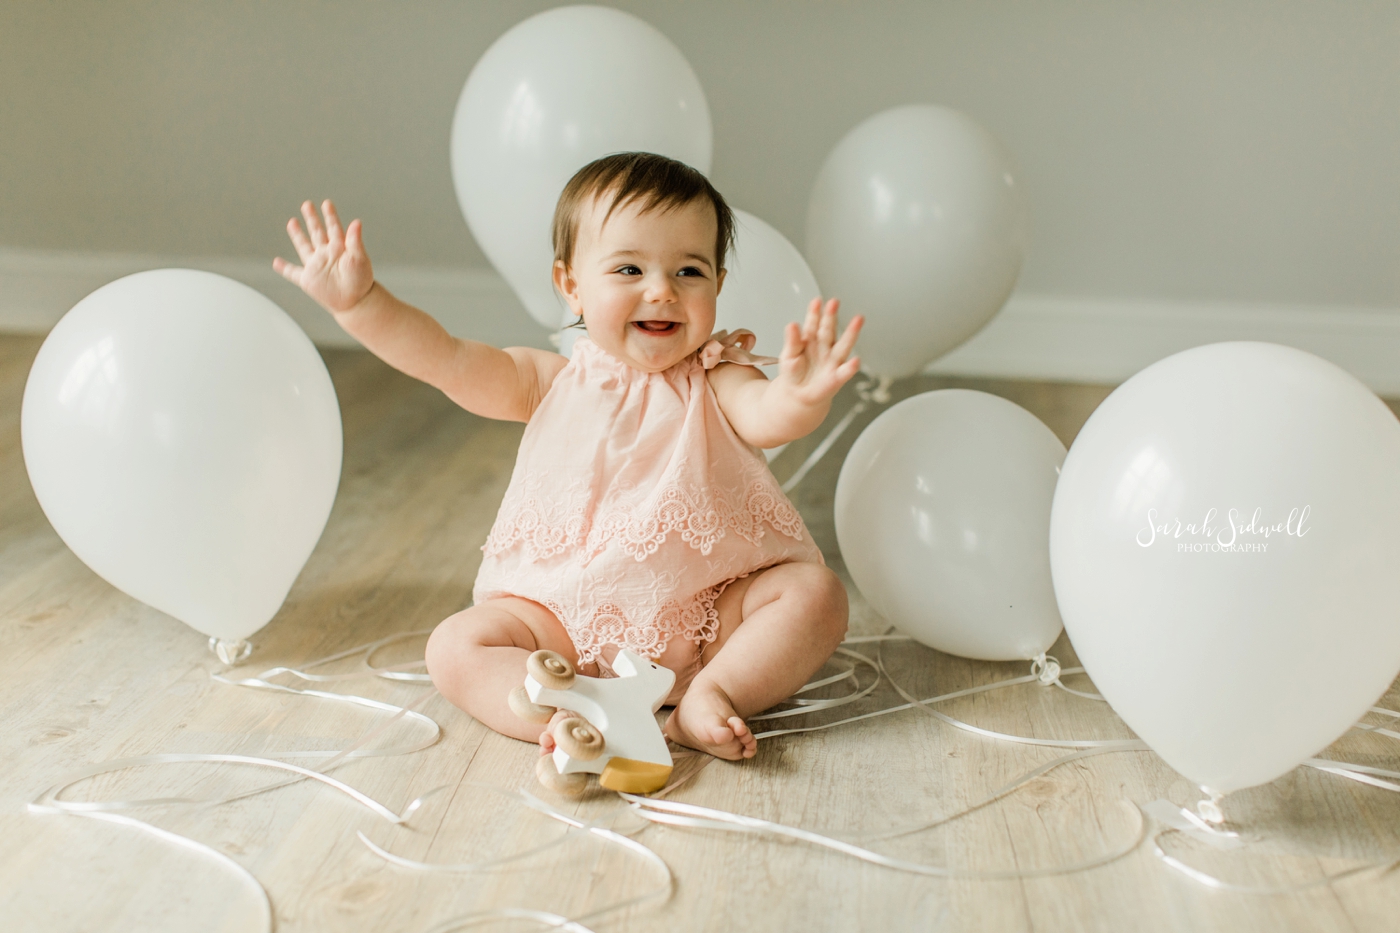 A baby sits with white balloons